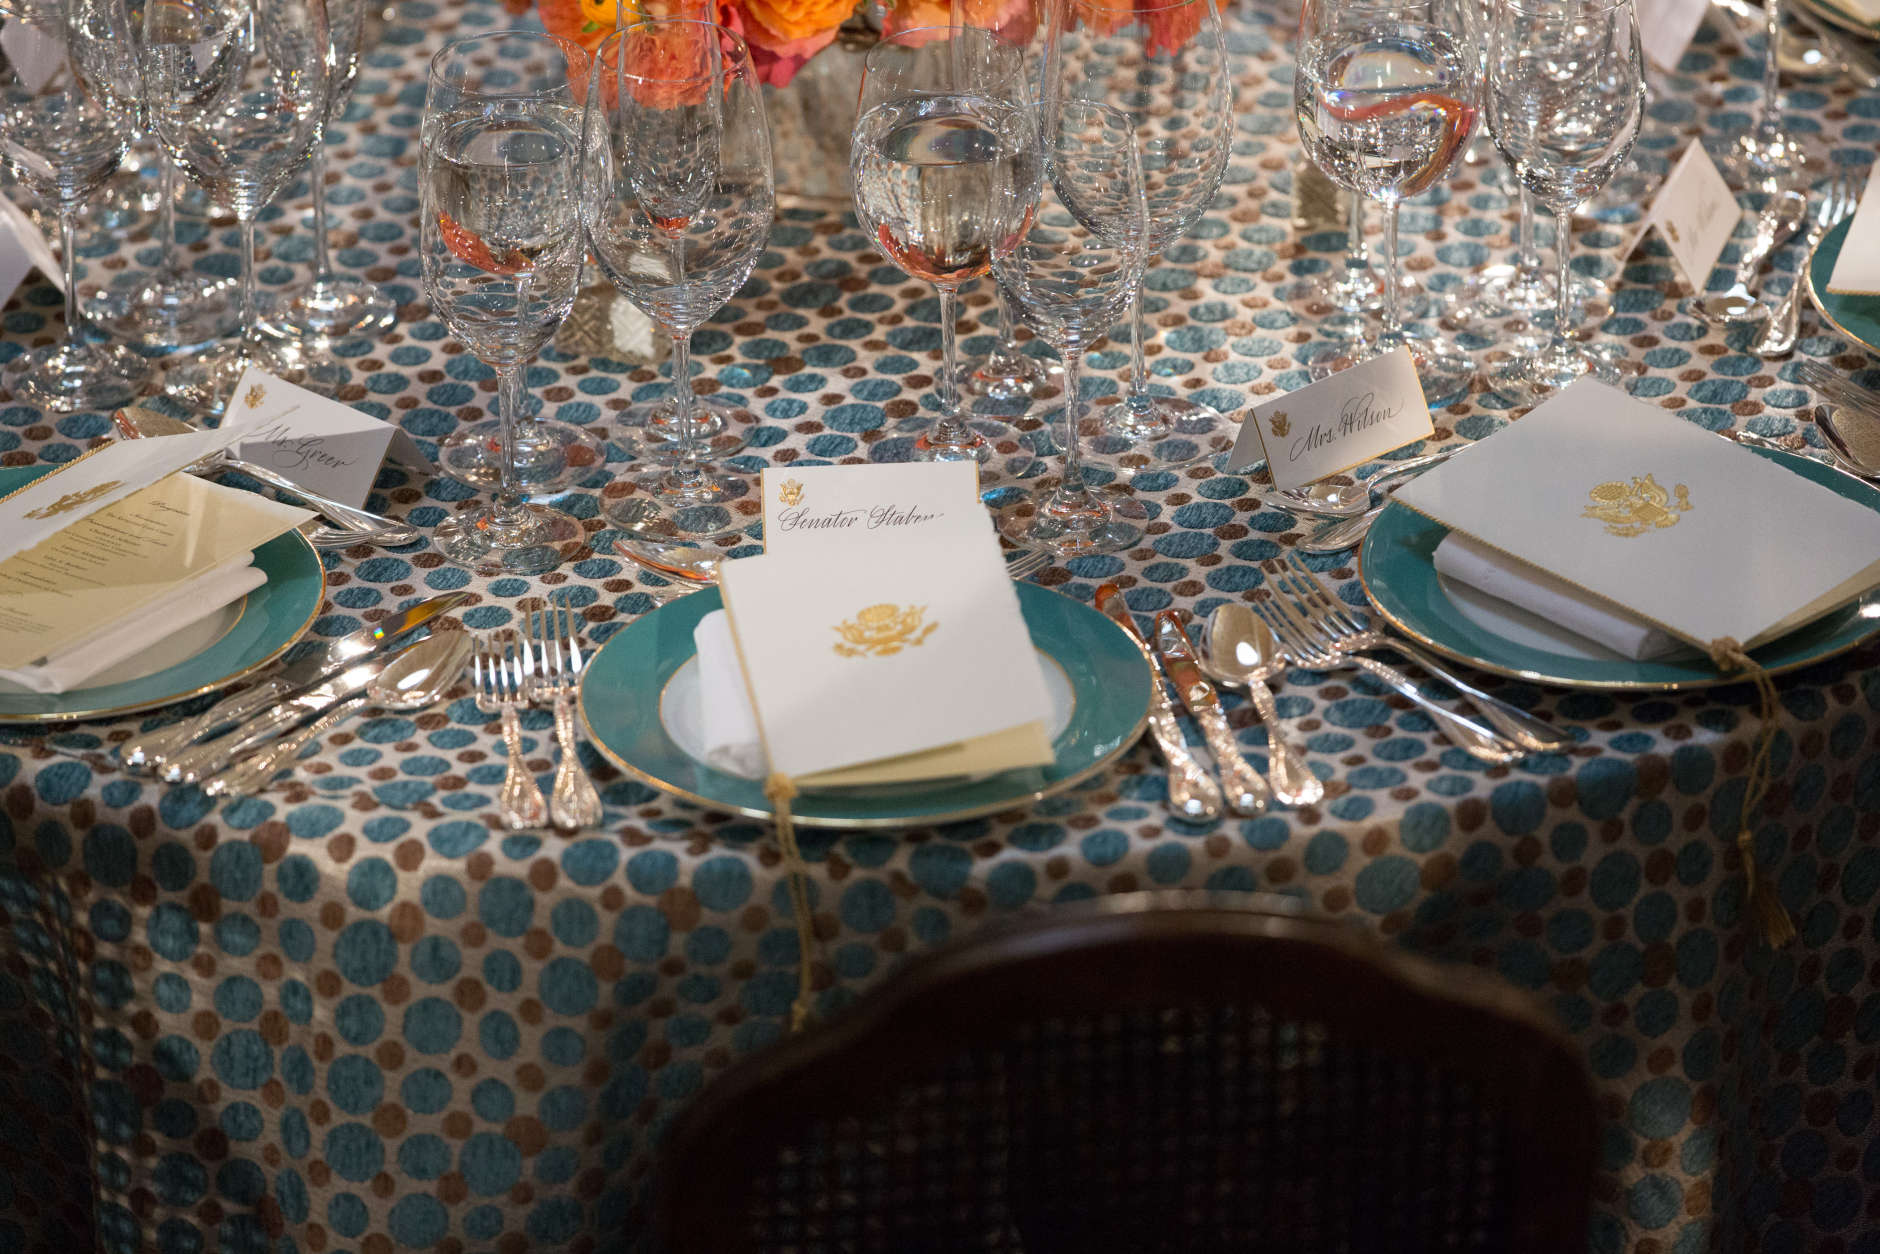 WASHINGTON, DC - JANUARY 21:  Place settings and programs sit on a table at the Inaugural Luncheon in Statuary Hall on Inauguration day at the U.S. Capitol building January 21, 2013 in Washington D.C. U.S. President Barack Obama was ceremonially sworn in for his second term today. (Photo by Allison Shelley/Getty Images)